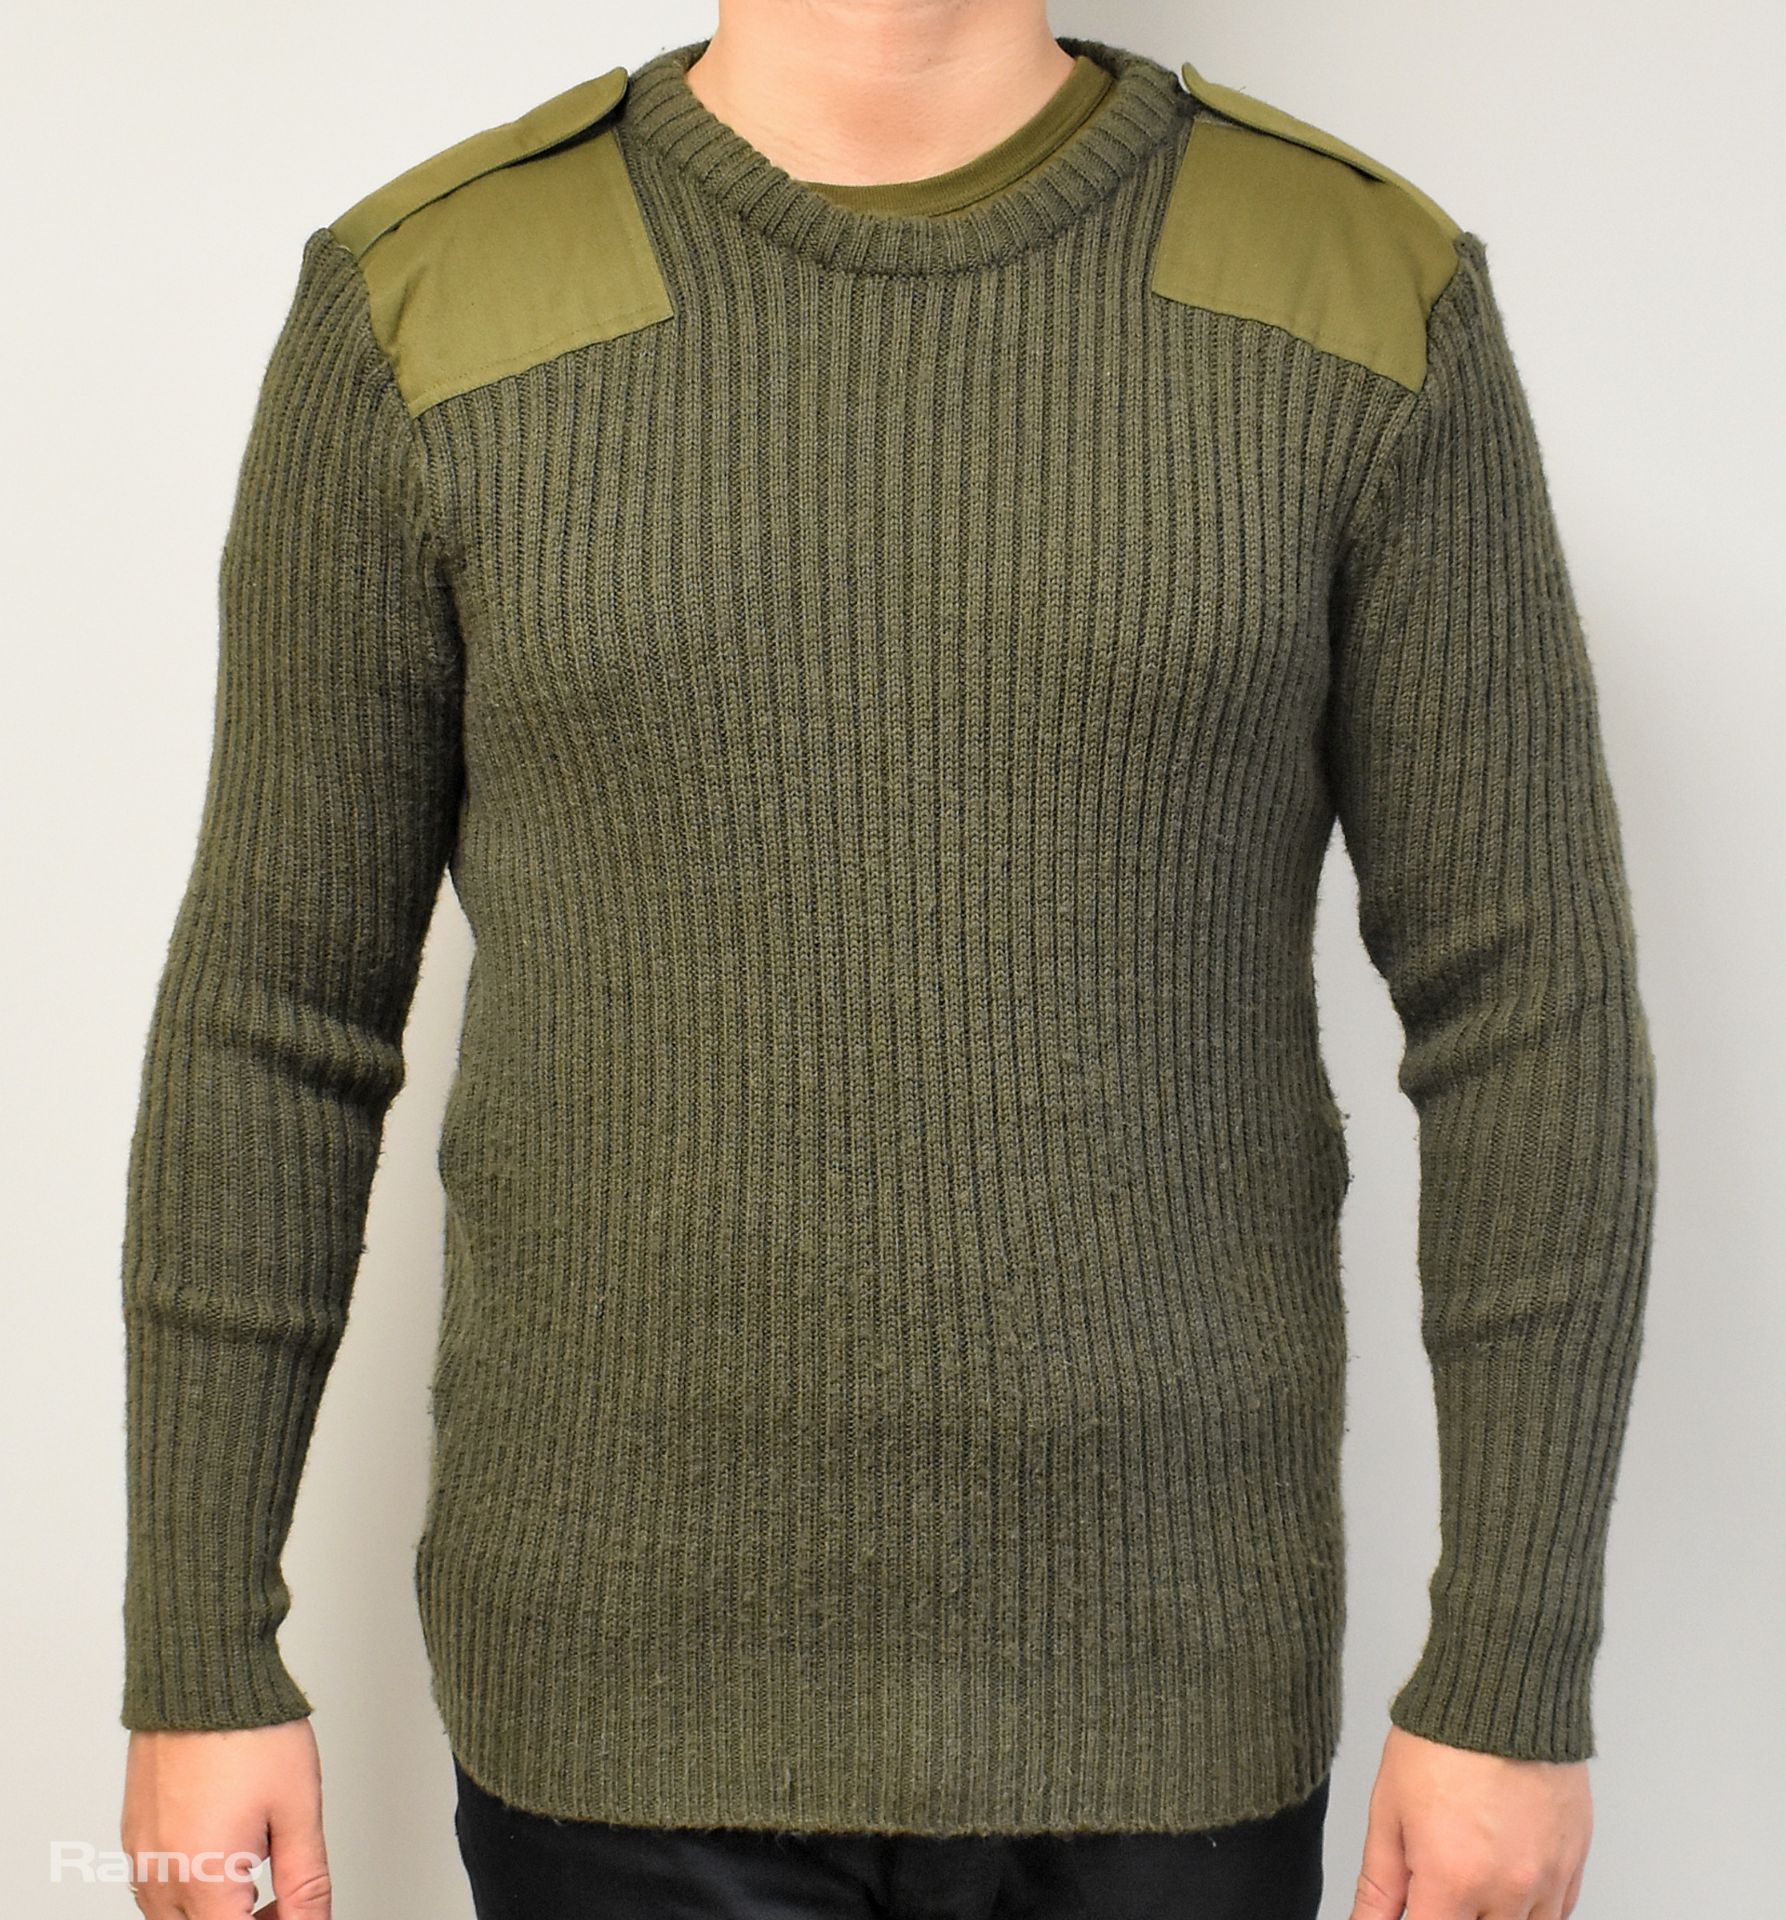 100x British Army wool jerseys - Olive - mixed grades and sizes